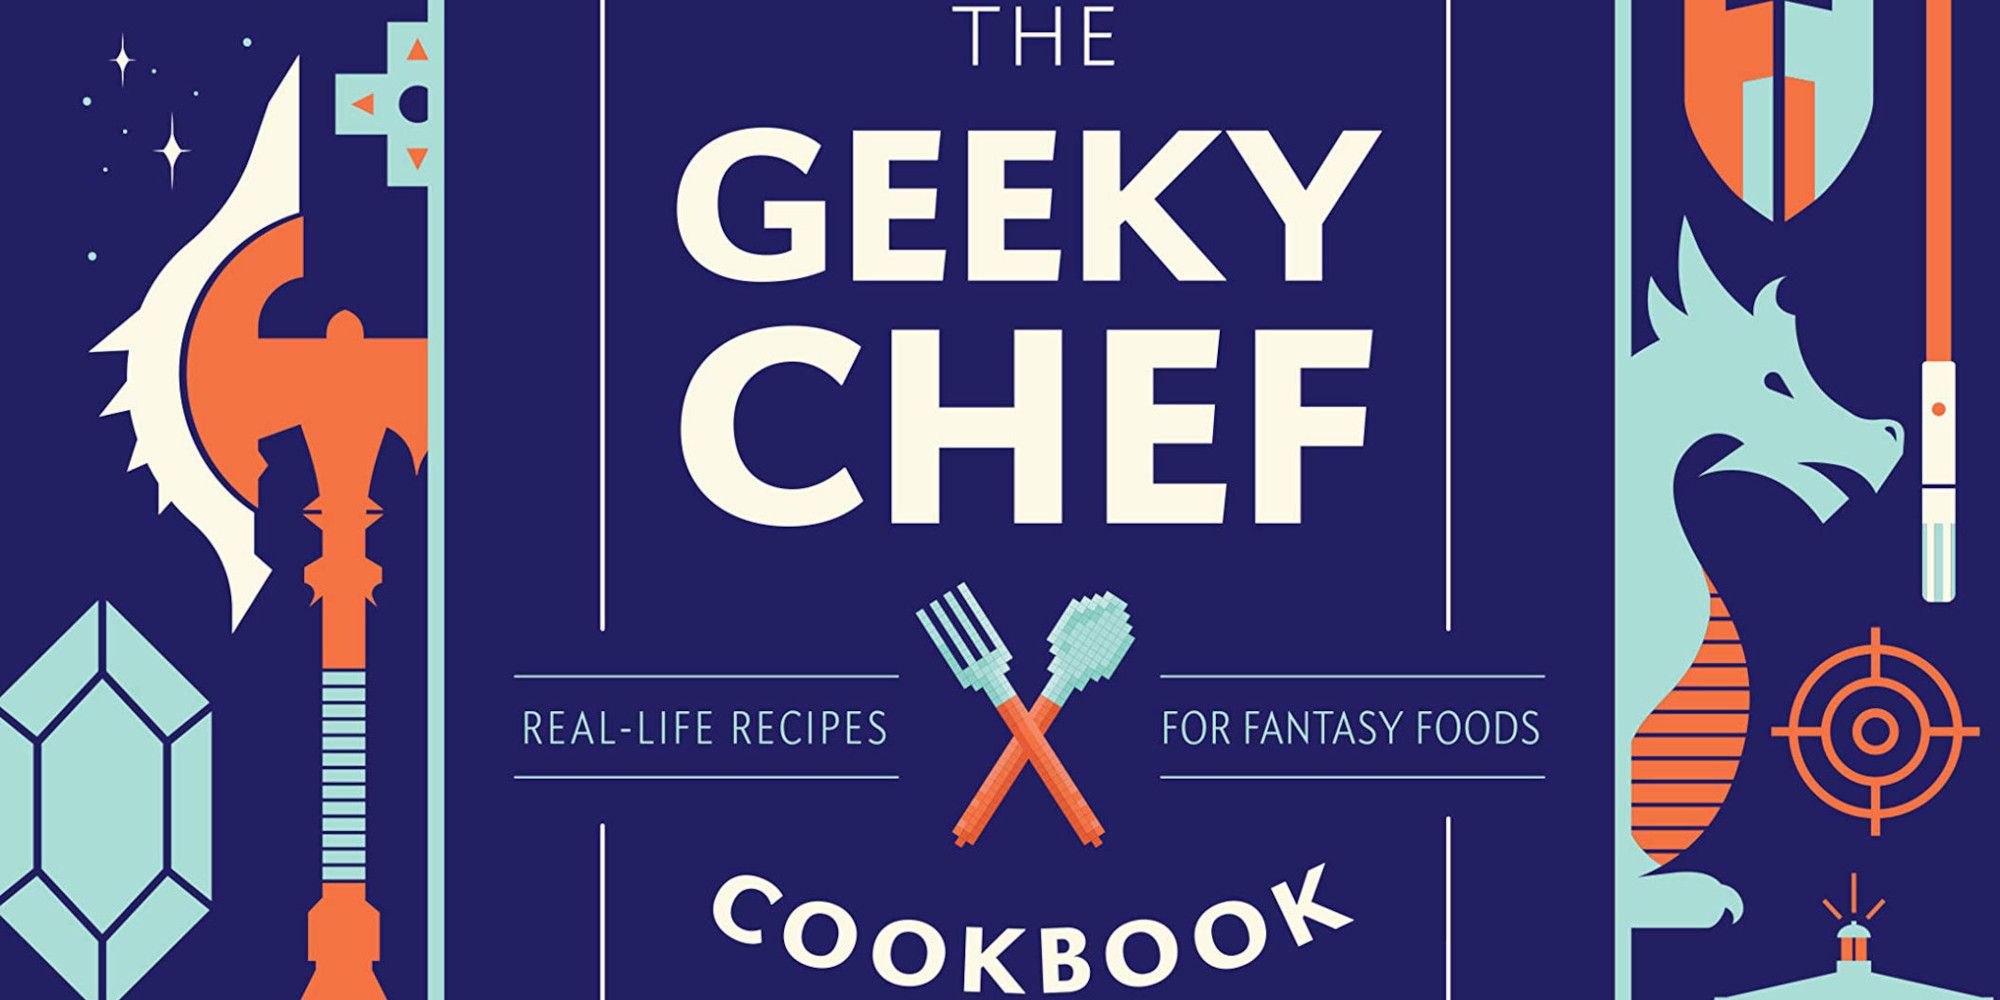 The Geeky Chef Cookbook- Real-Life Recipes for Your Favorite Fantasy Foods